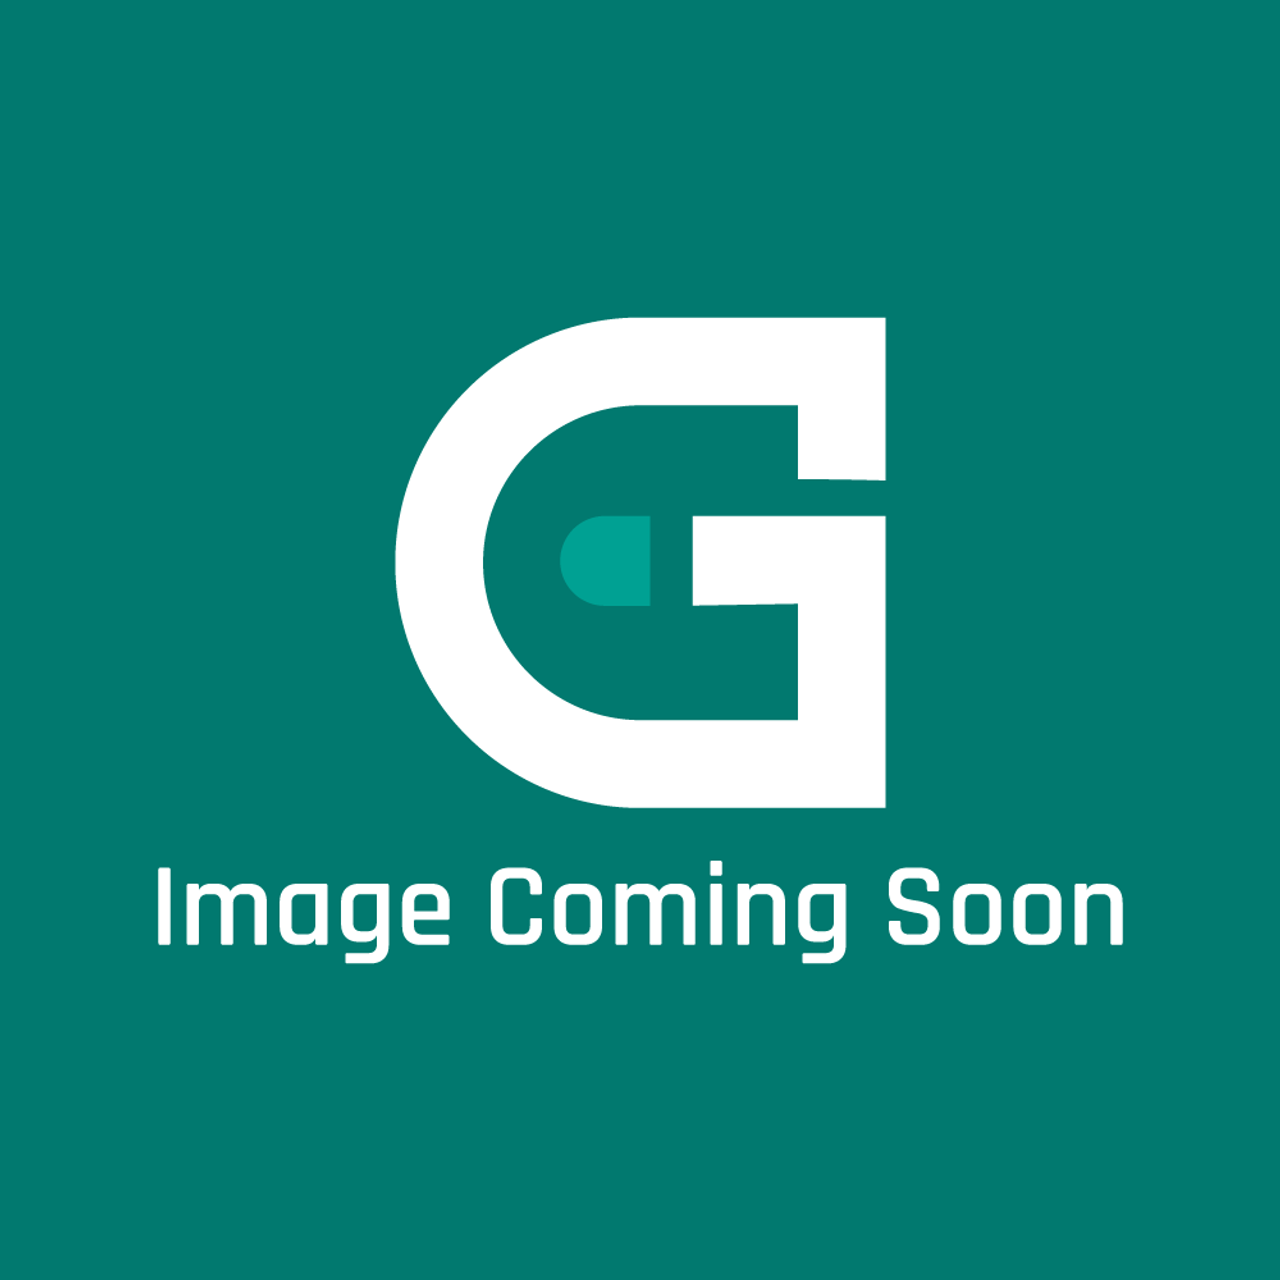 LG 6210VH0004D - Filter,Ferrite Core - Image Coming Soon!